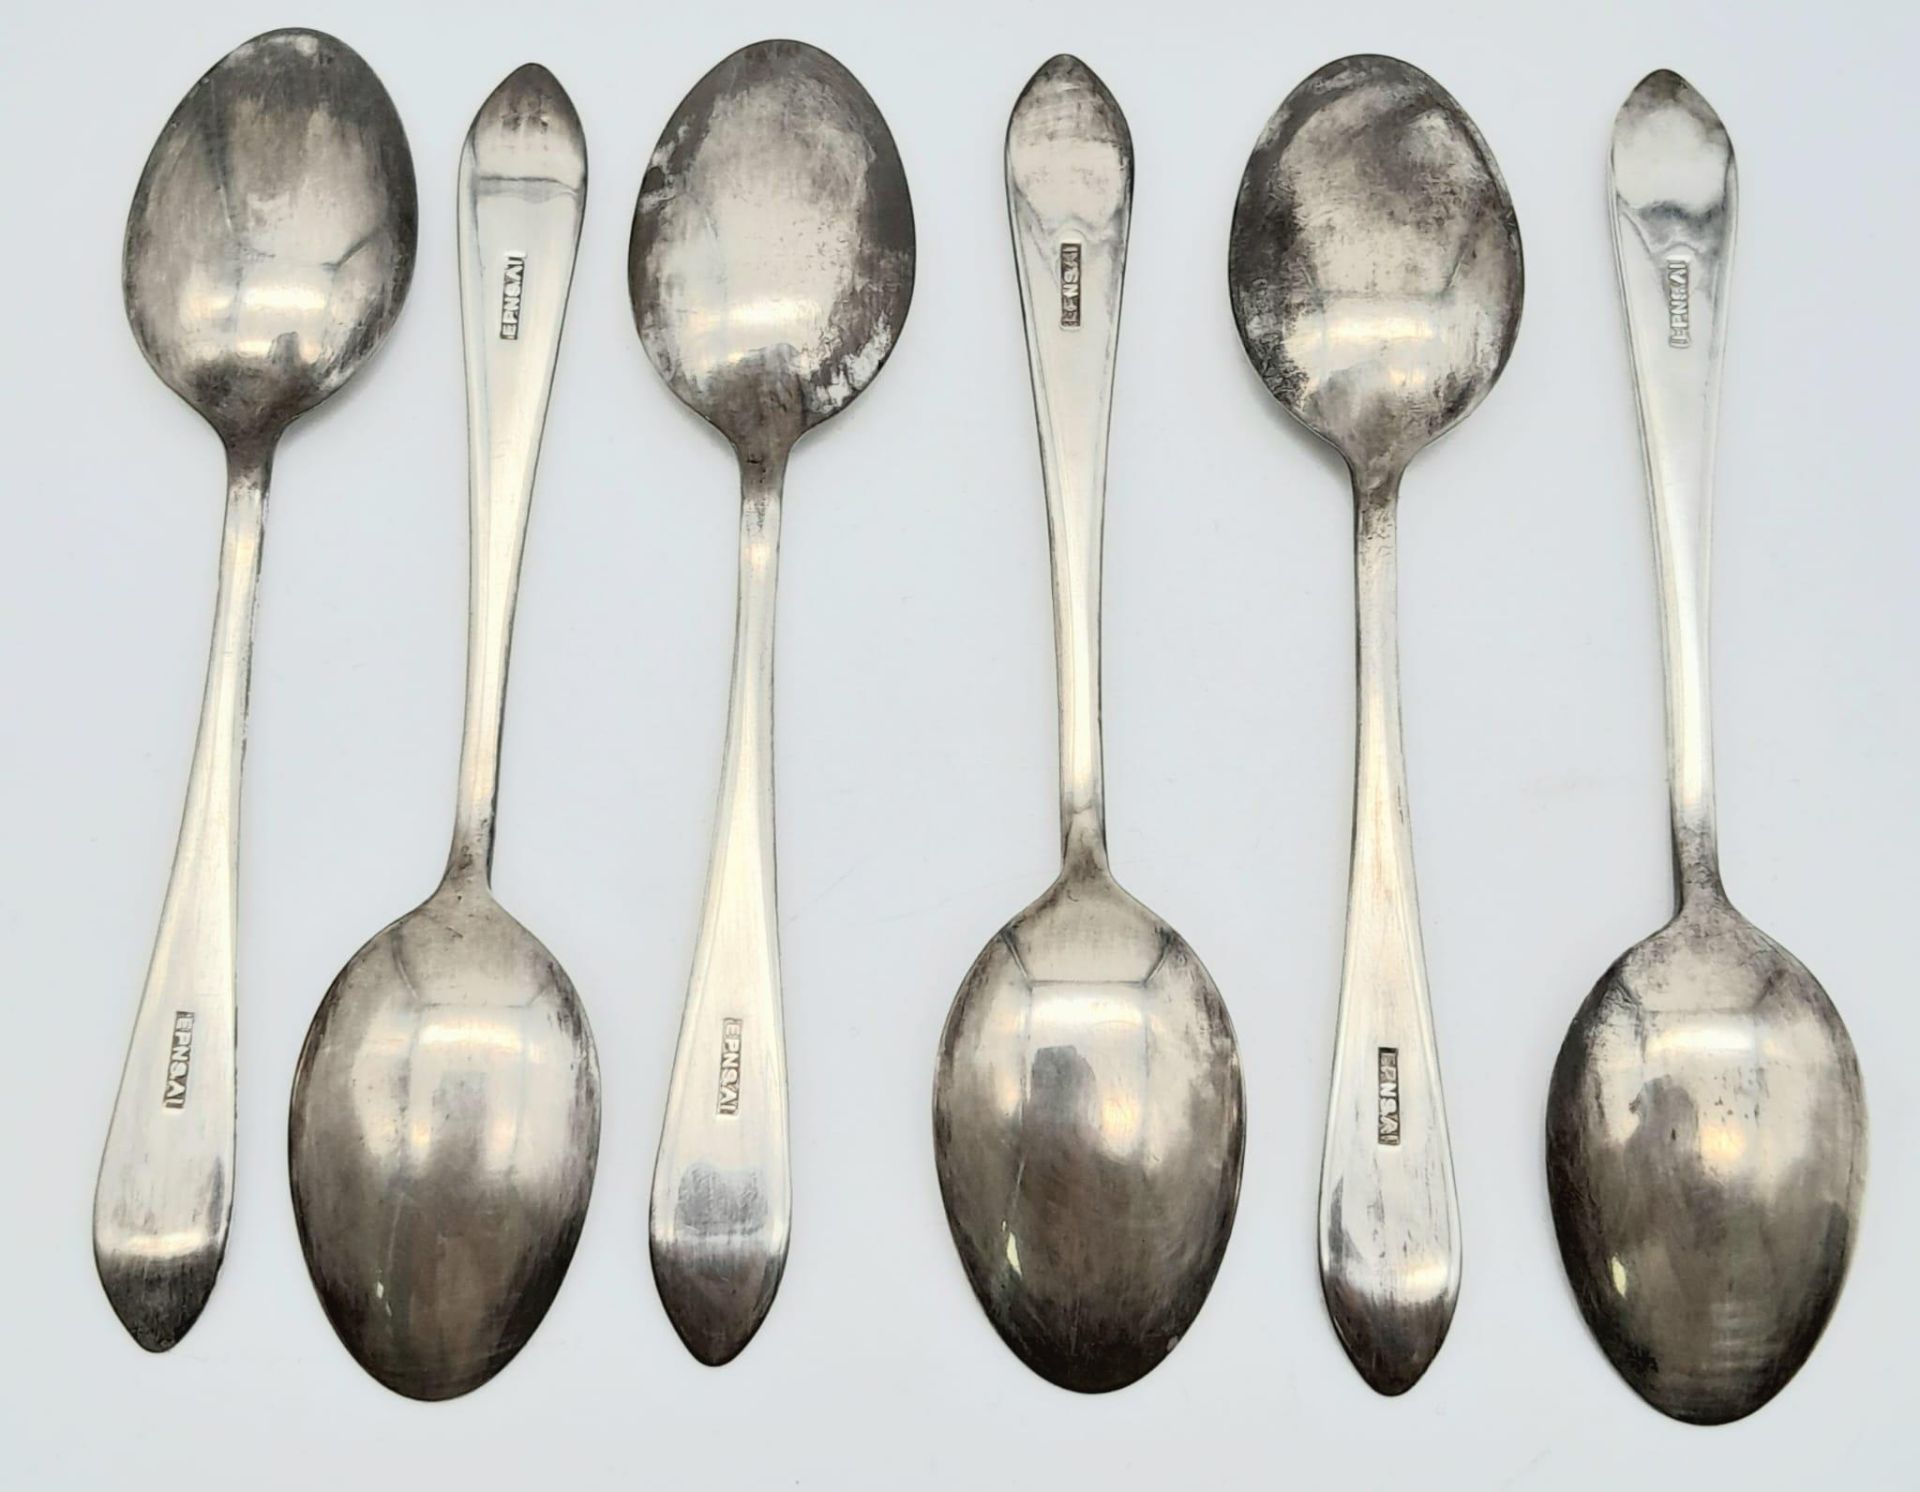 Set of 6 Royal Flying Corps Silver Plated Teaspoons in original case. - Image 3 of 5